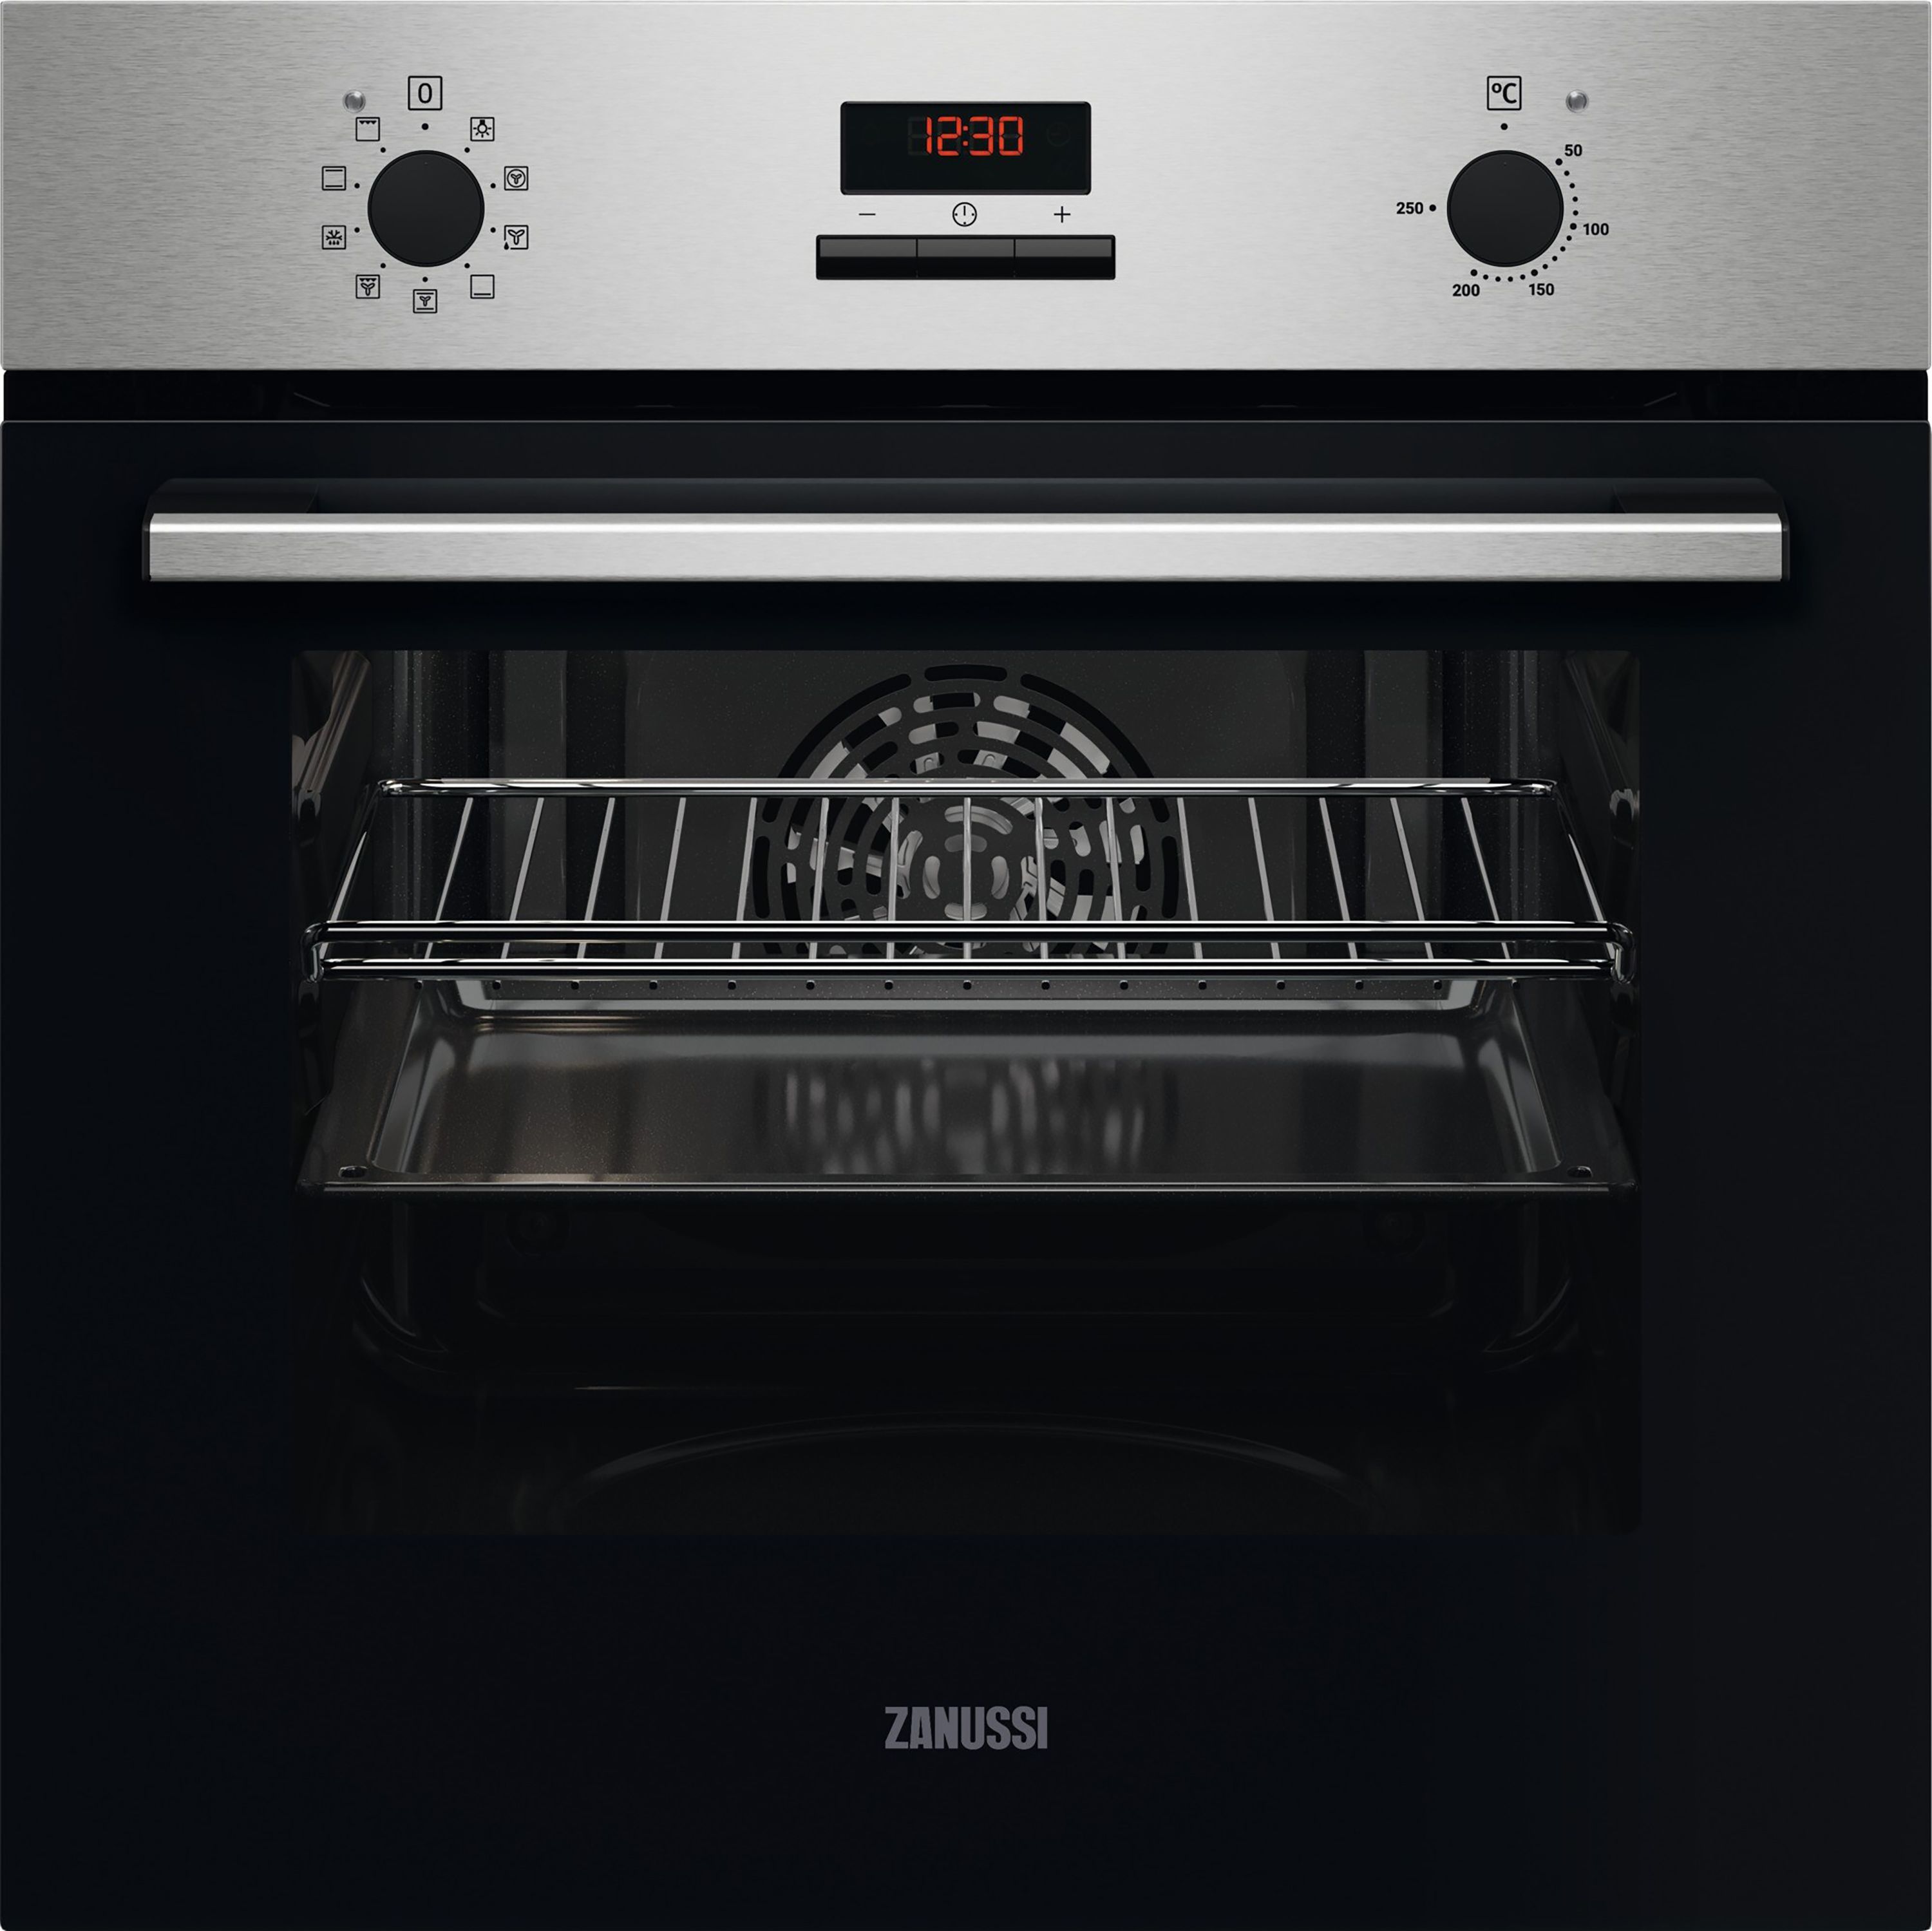 Zanussi Series 20 ZOHNE2X2 Built In Electric Single Oven - Stainless Steel - A Rated, Stainless Steel